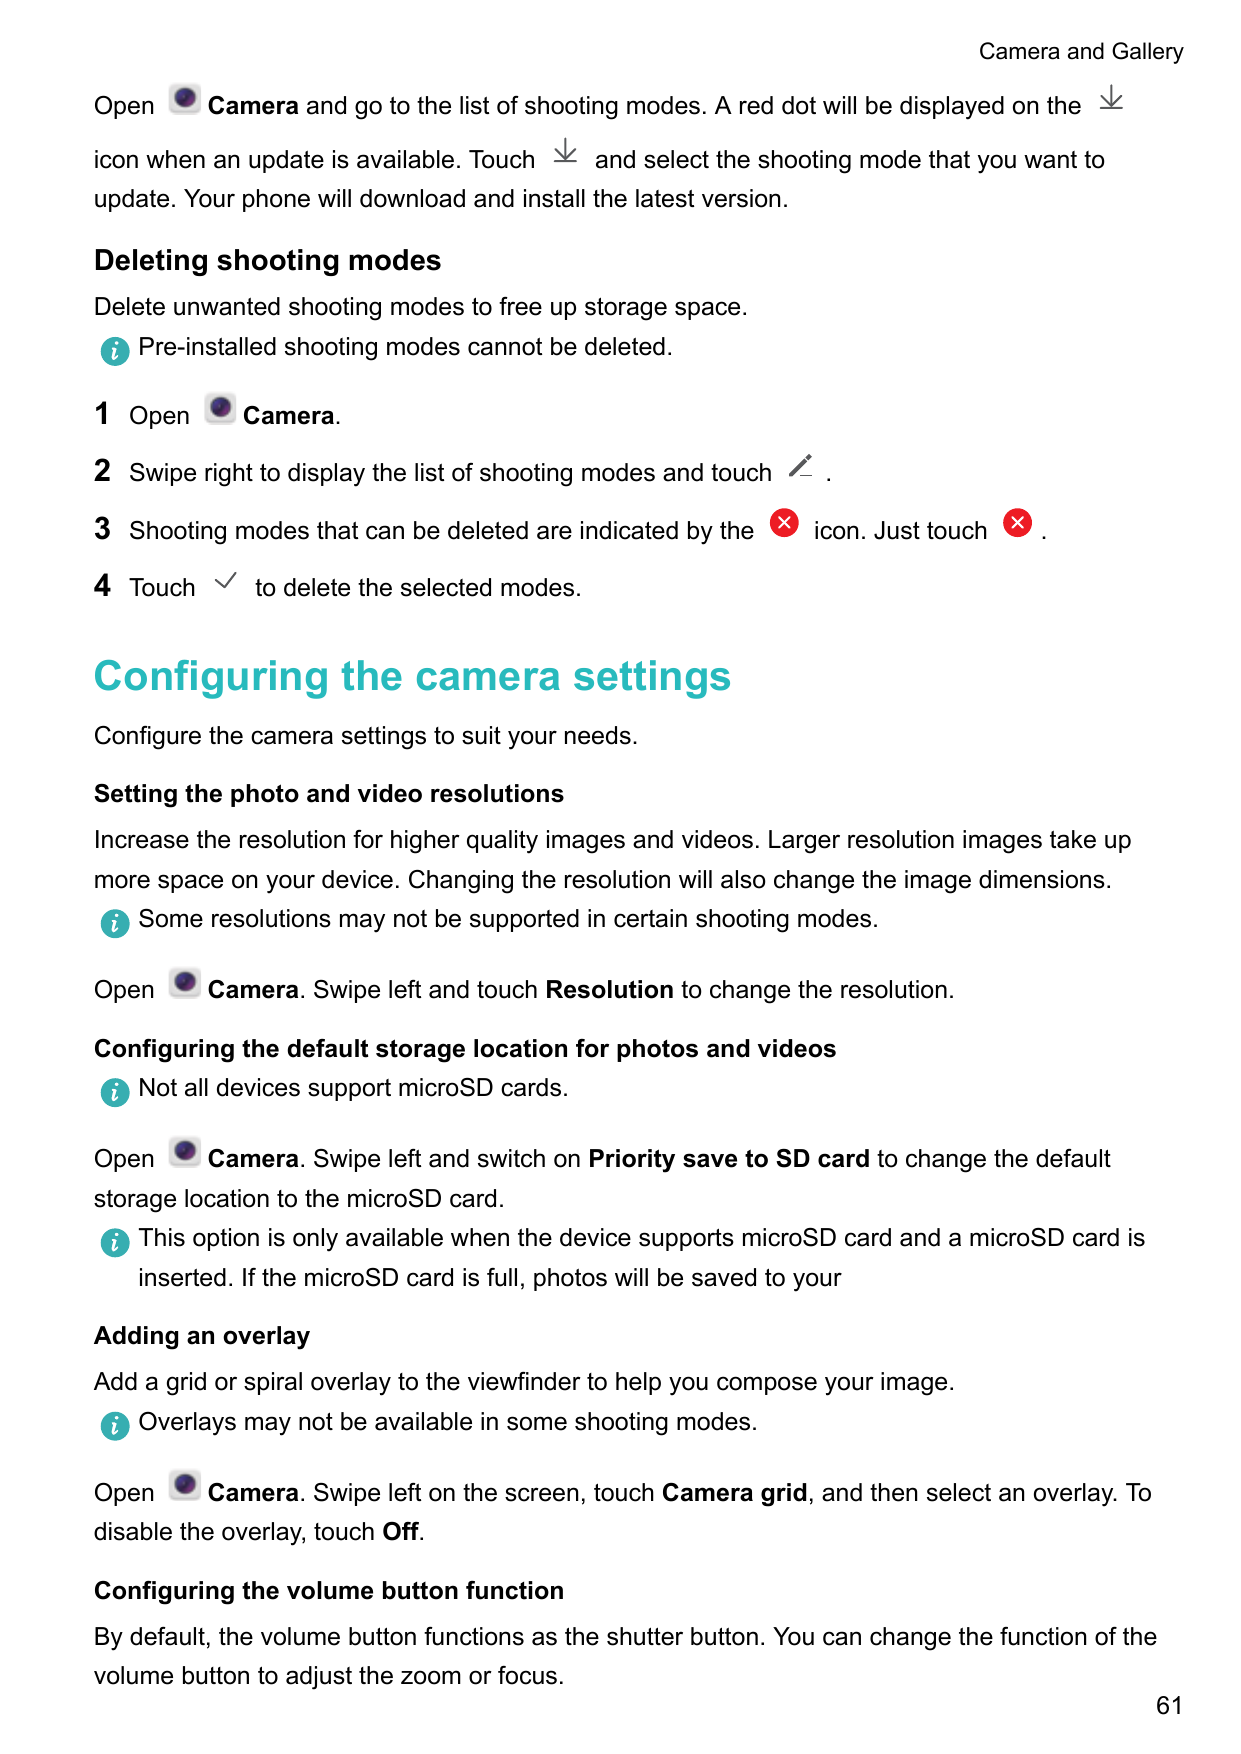 Camera and GalleryOpenCamera and go to the list of shooting modes. A red dot will be displayed on theicon when an update is avai